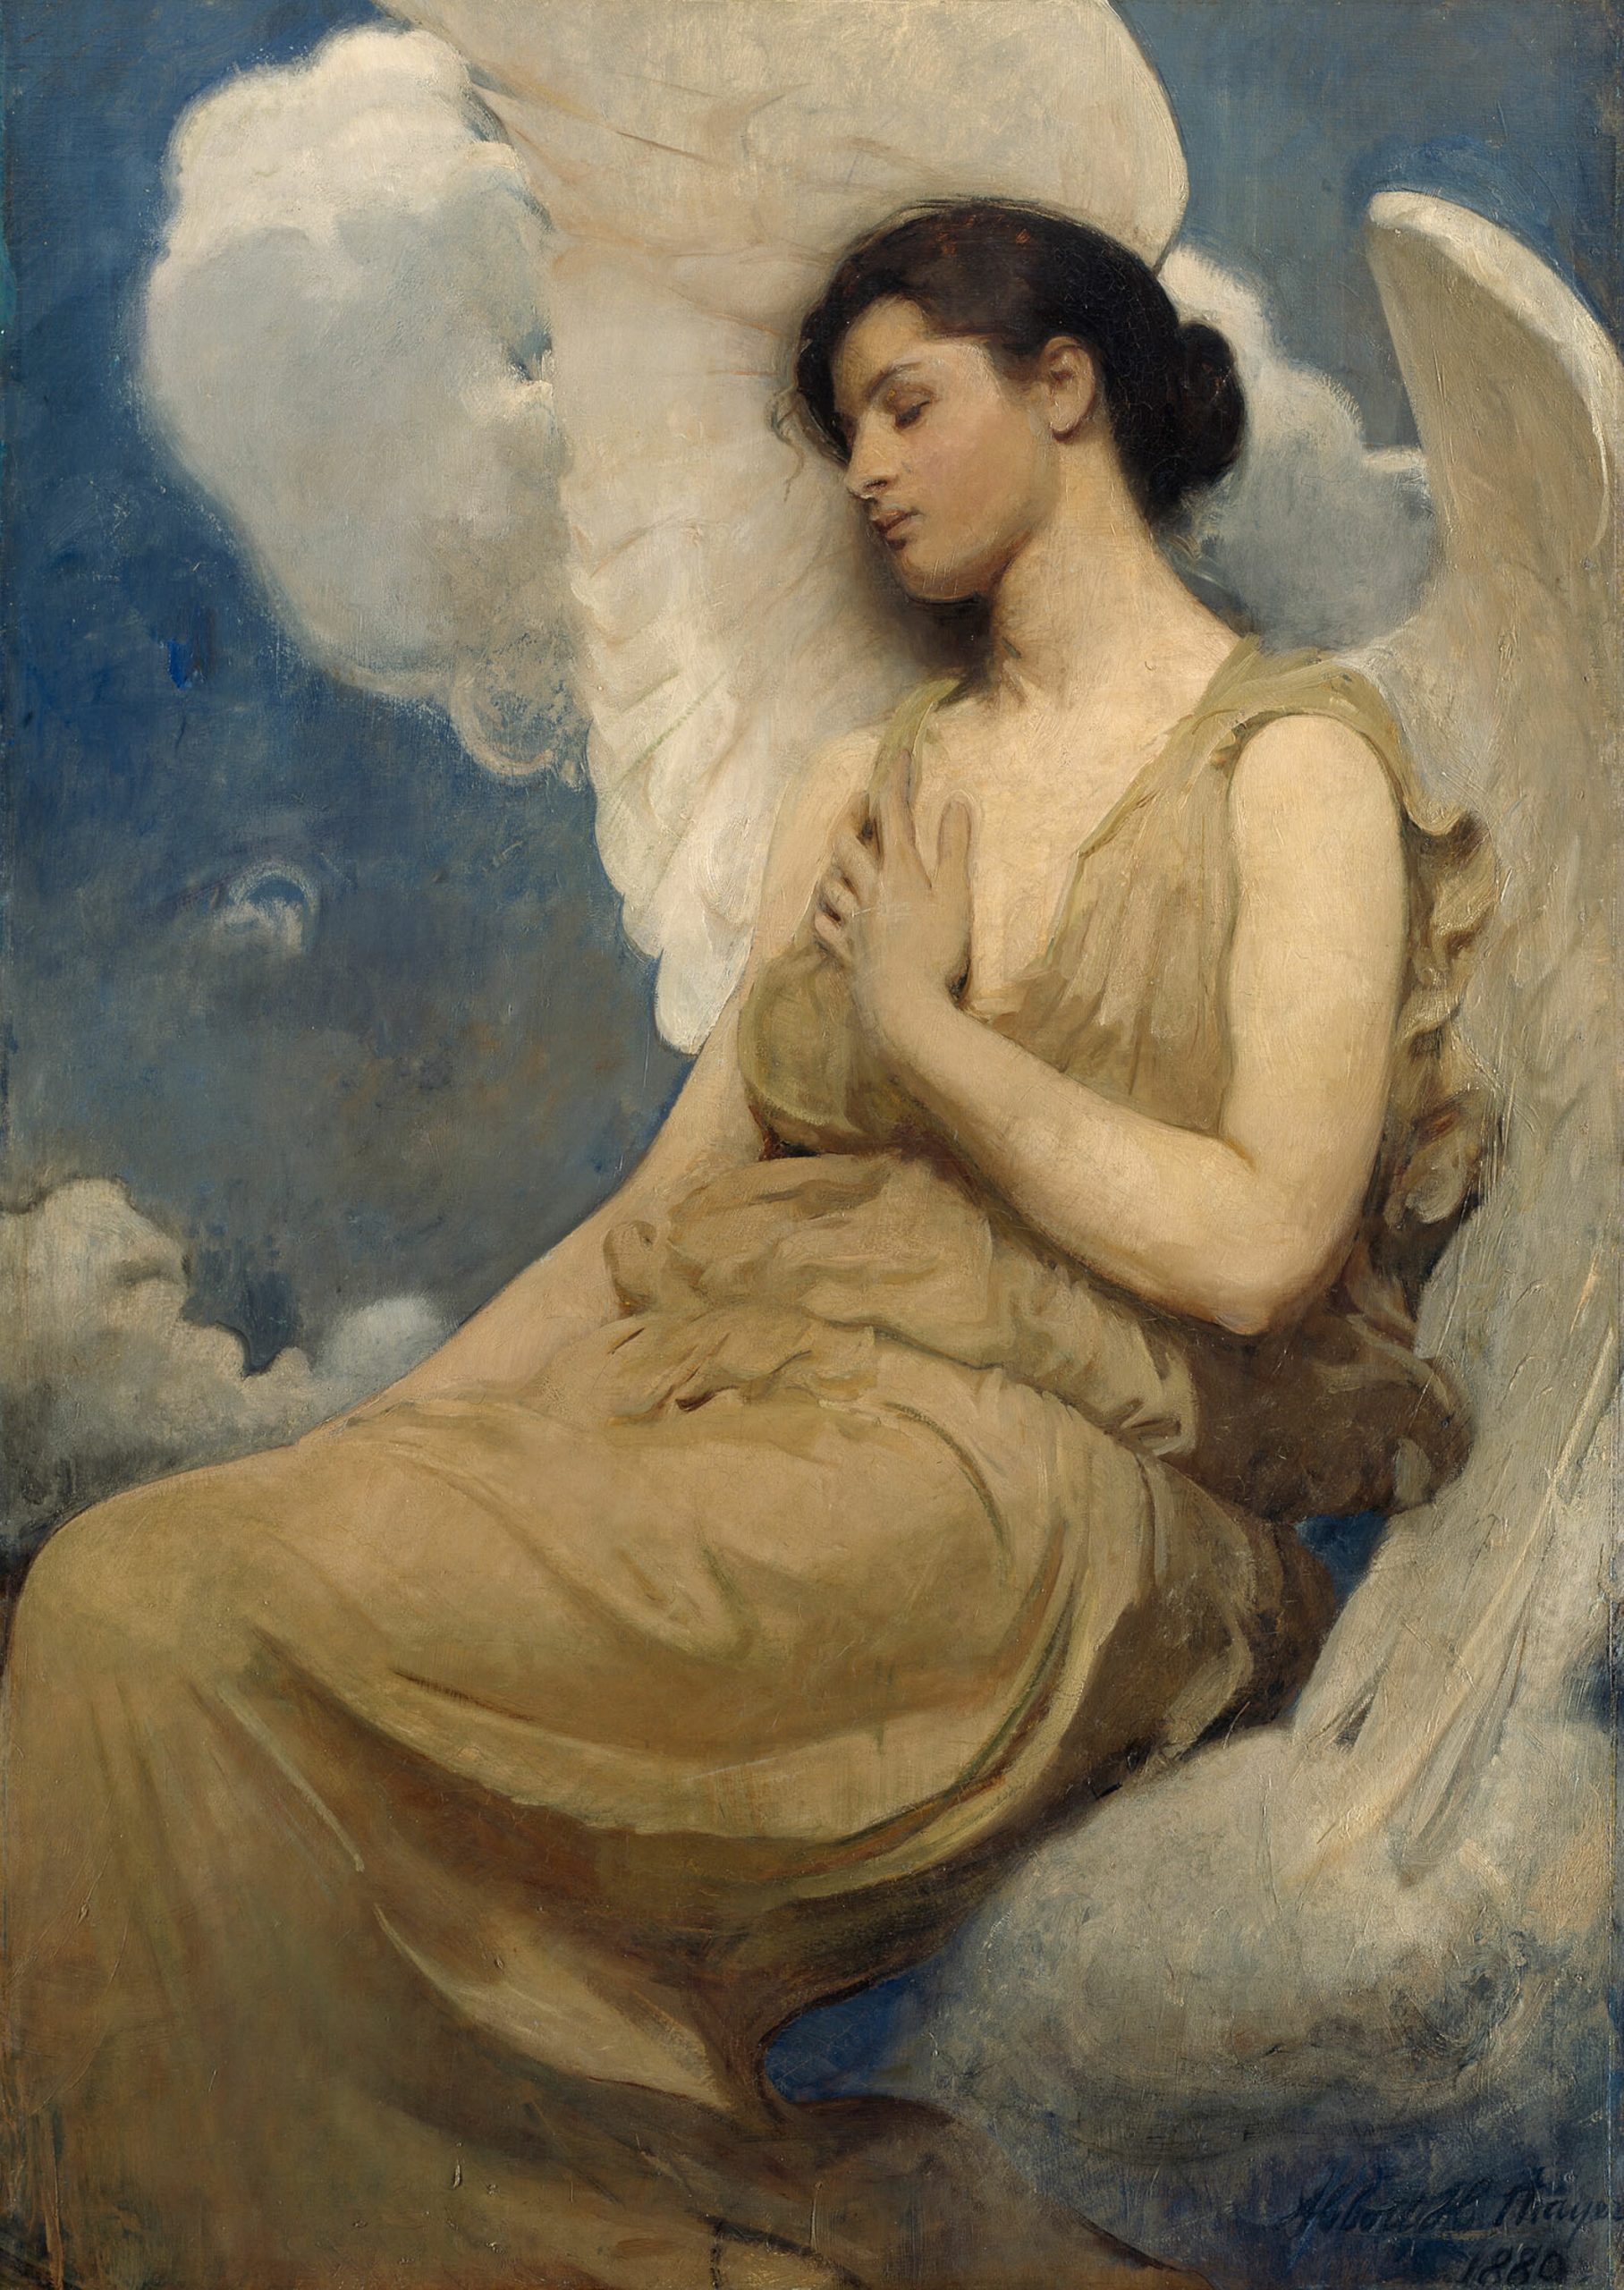 An angel rests in the clouds with her eyes closed left hand over her heart.